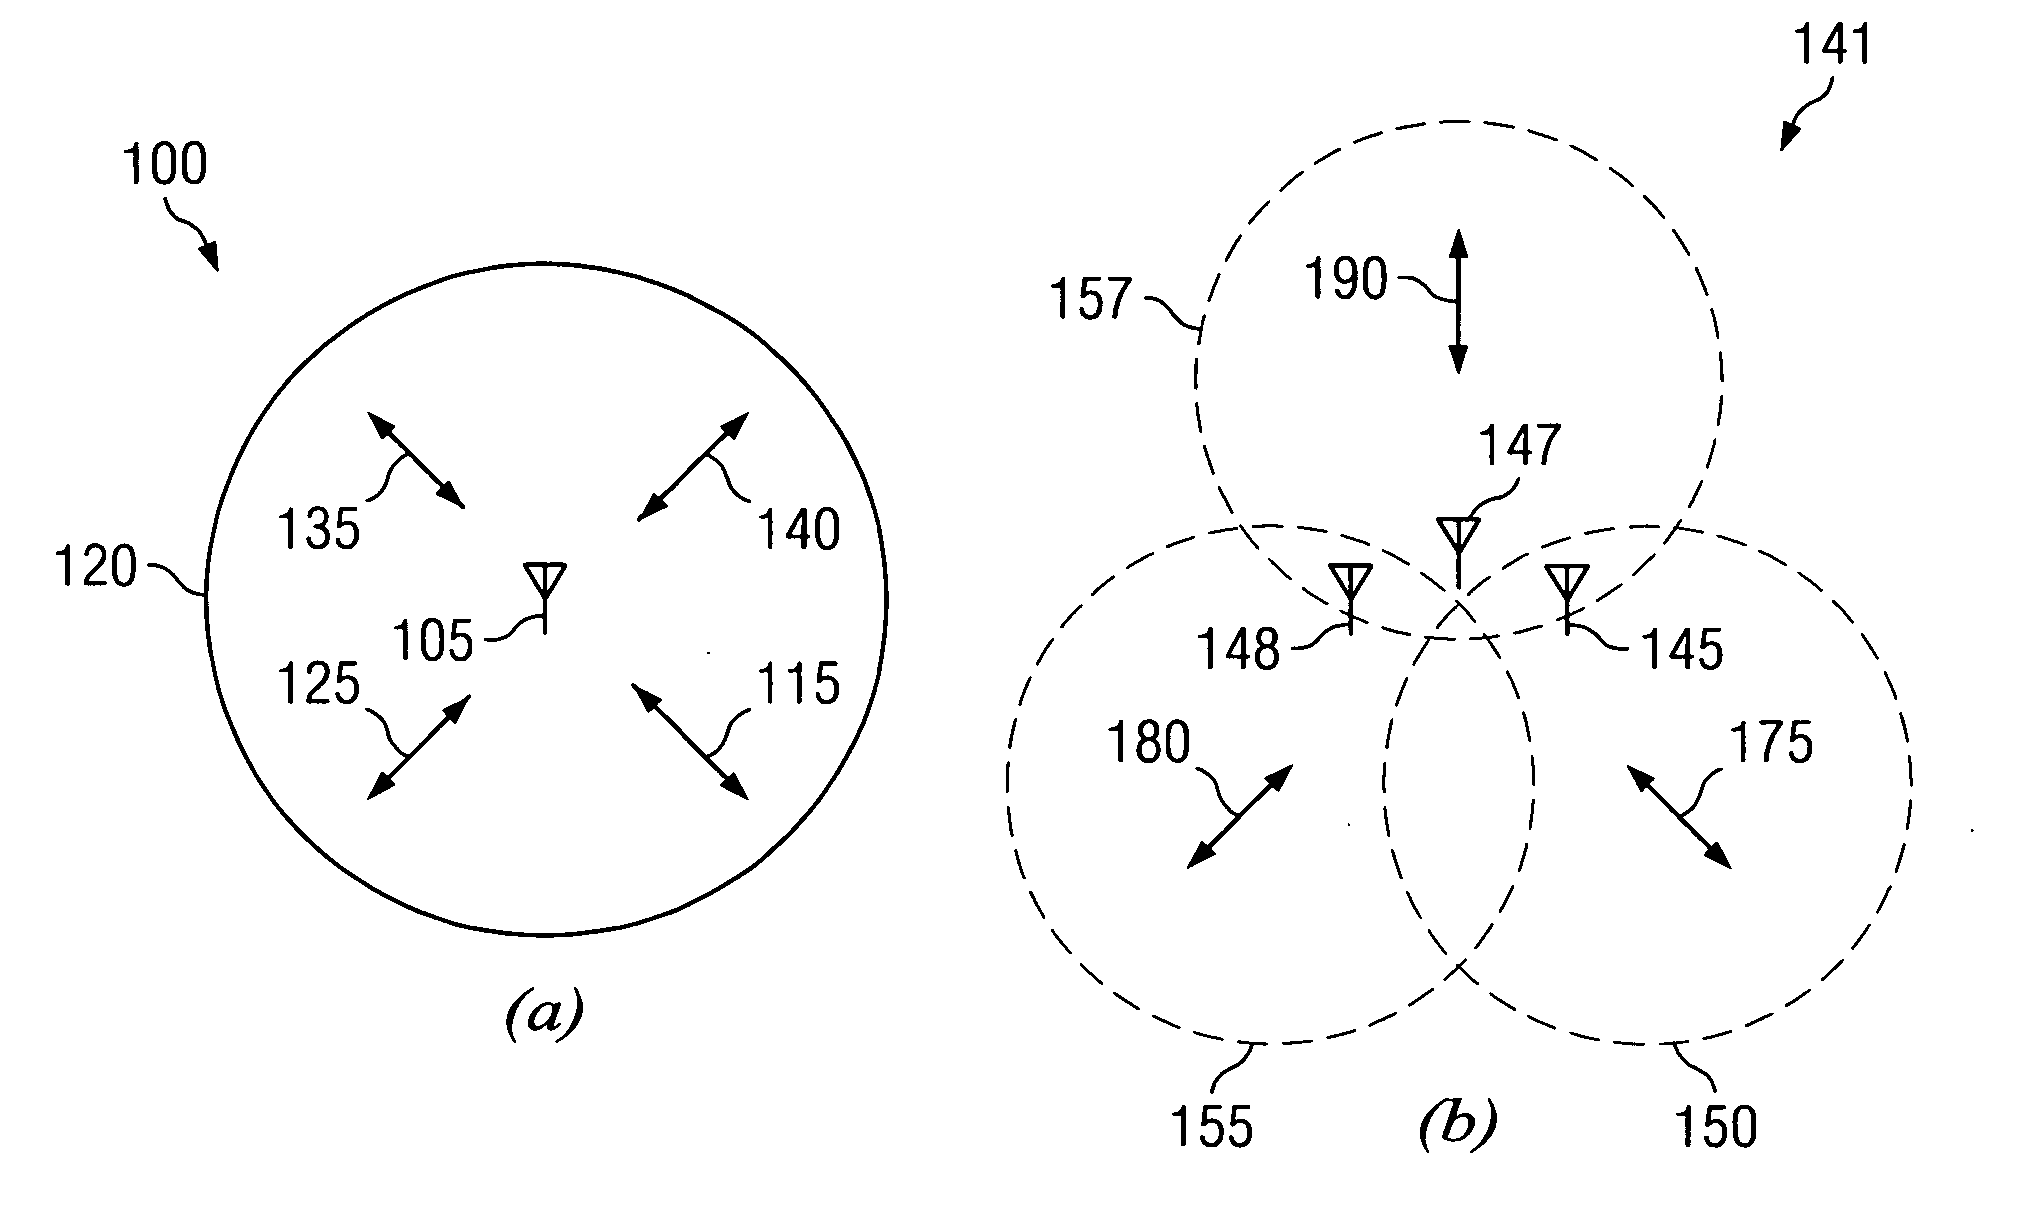 System and Method for Supporting Antenna Beamforming in a Cellular Network